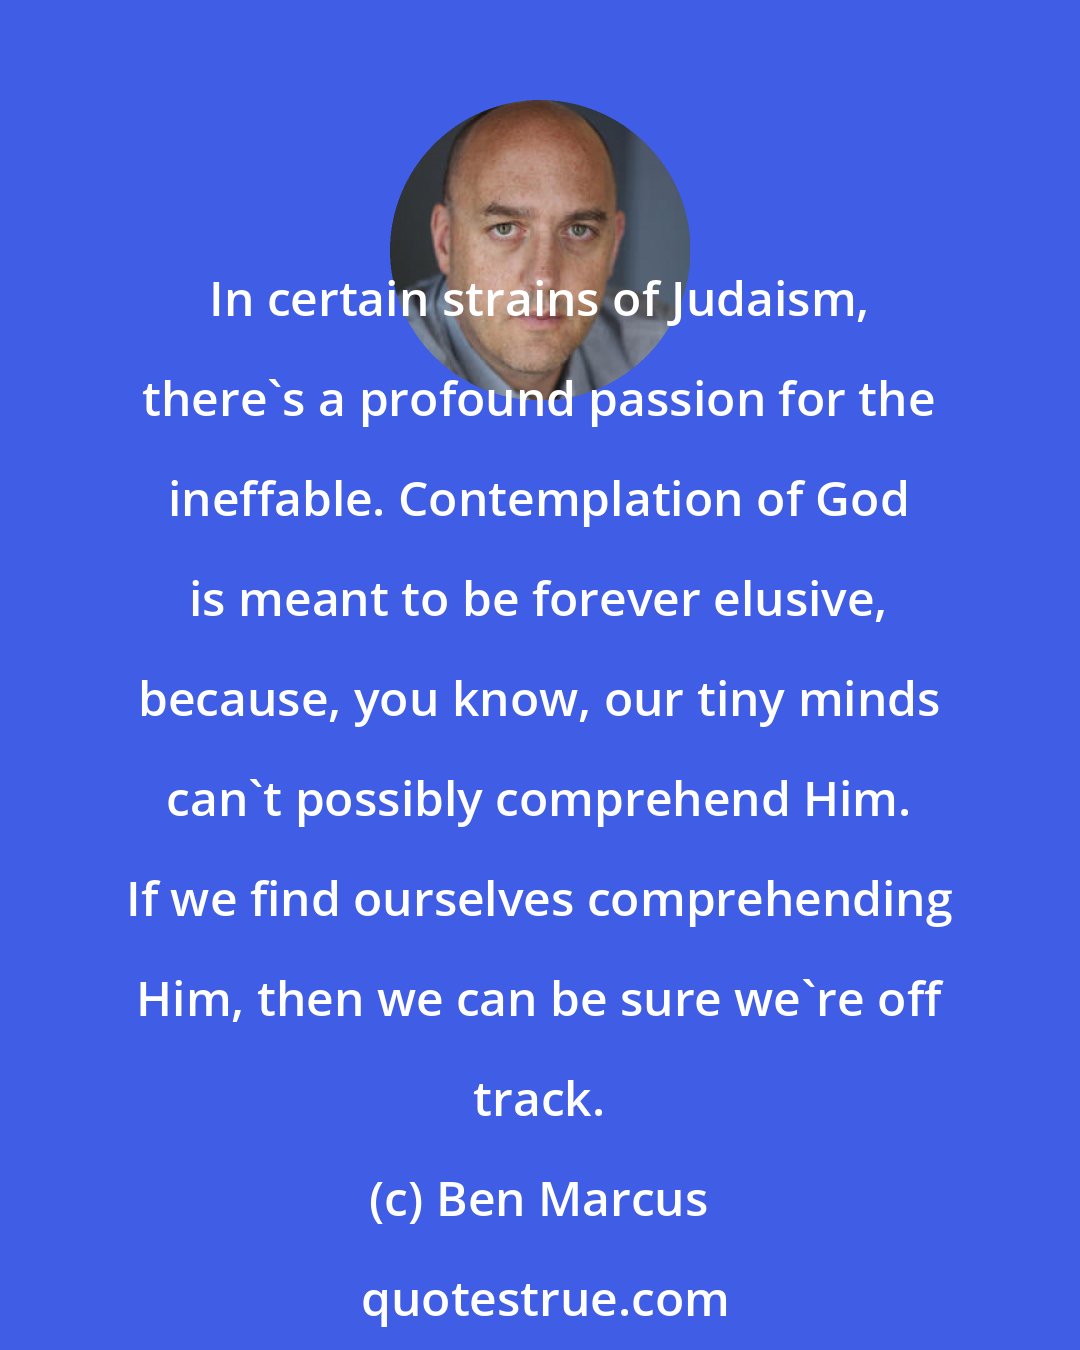 Ben Marcus: In certain strains of Judaism, there's a profound passion for the ineffable. Contemplation of God is meant to be forever elusive, because, you know, our tiny minds can't possibly comprehend Him. If we find ourselves comprehending Him, then we can be sure we're off track.